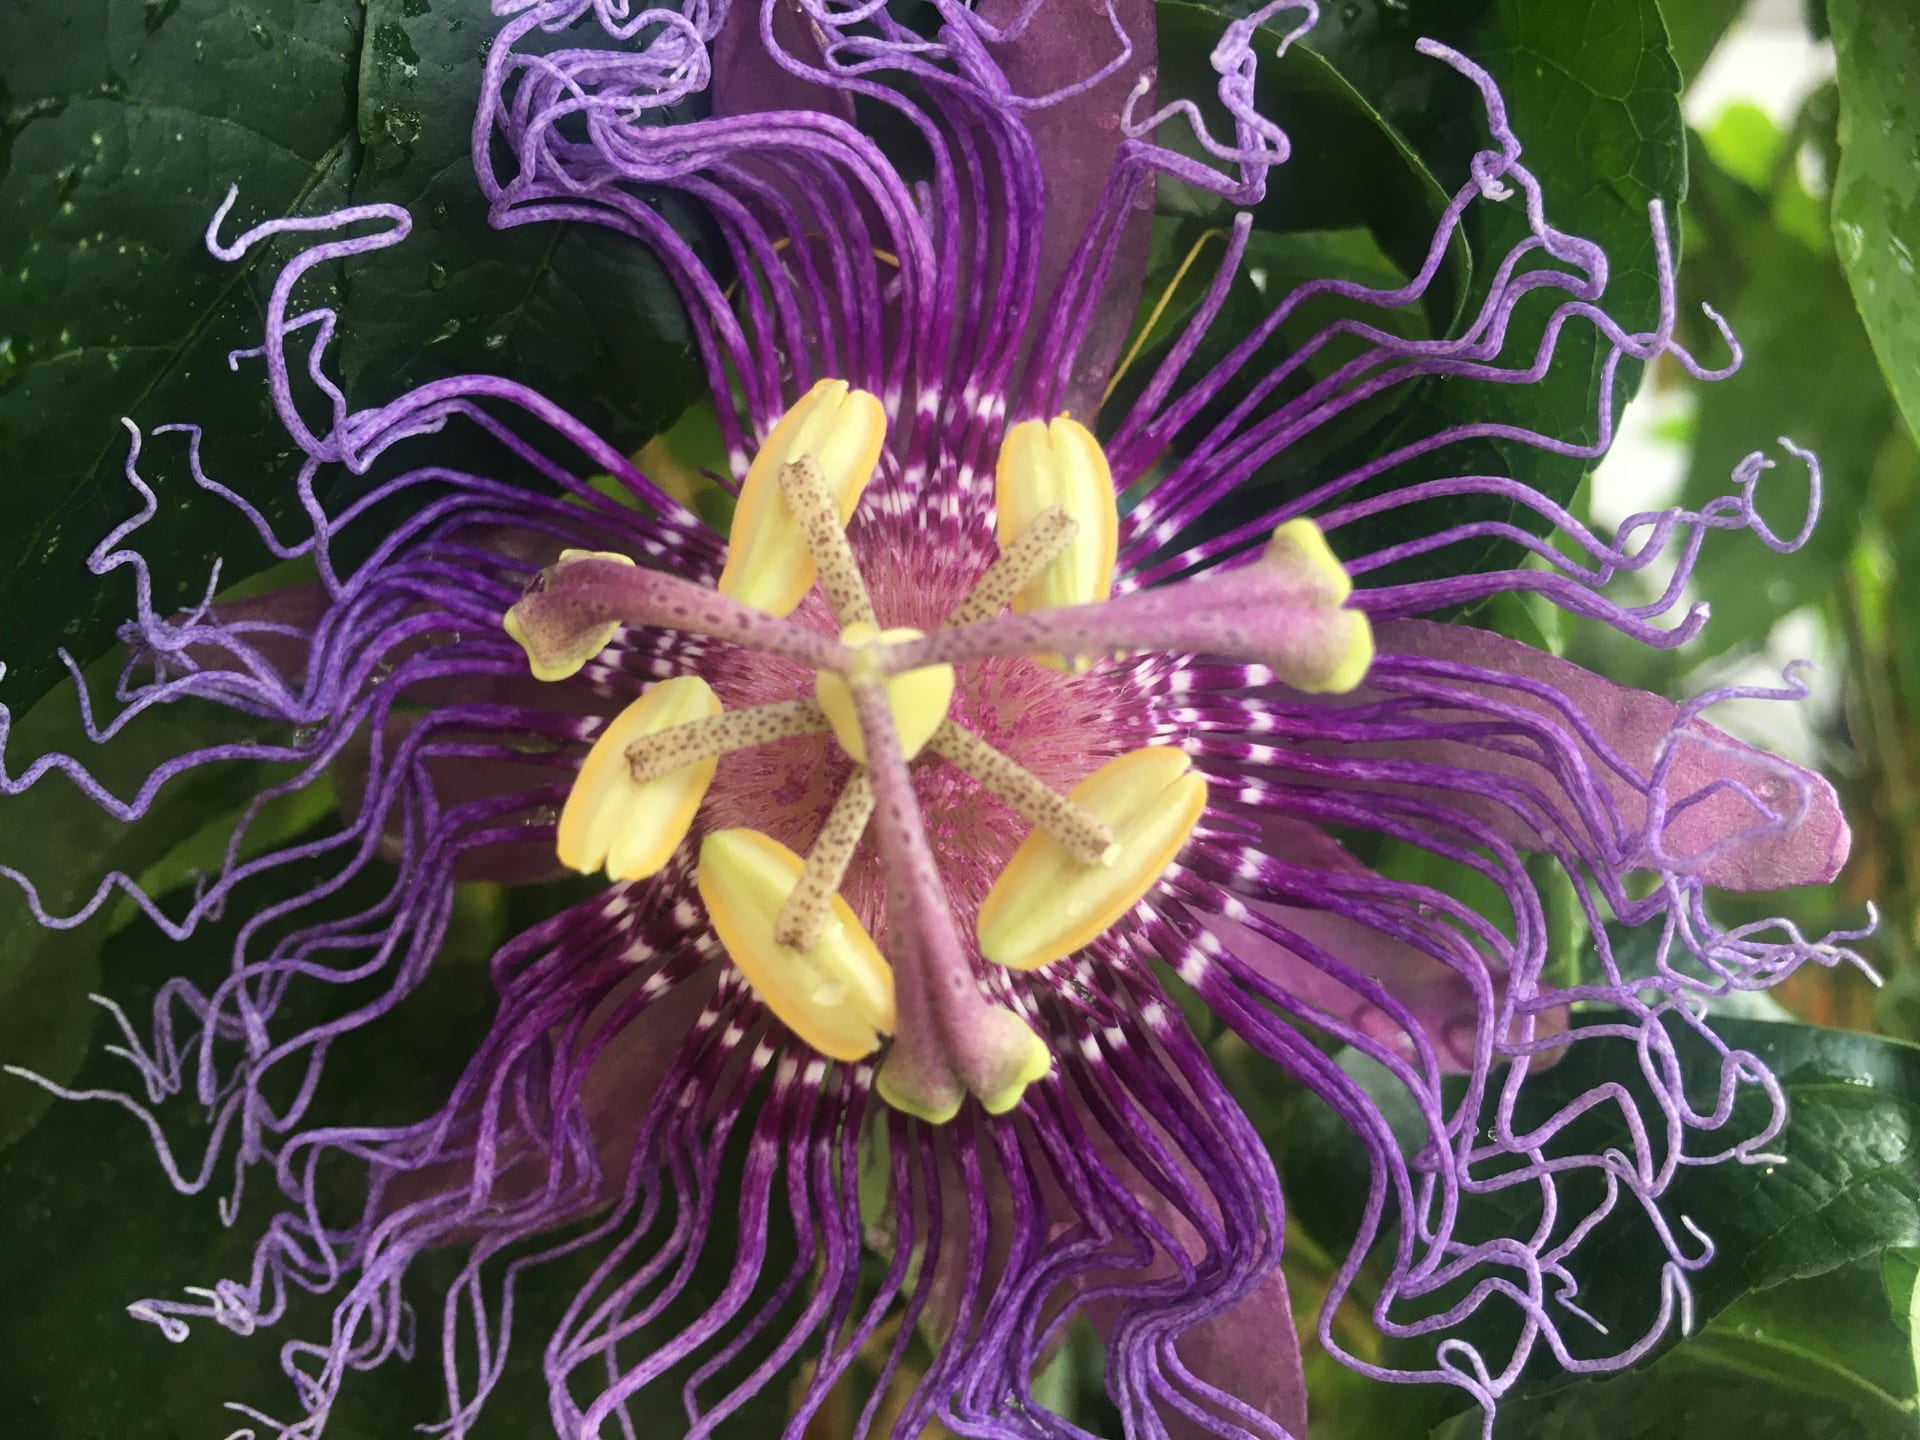 The blooms of passionflowers, Passiflora sp., develop into the tangy and sour passionfruit.